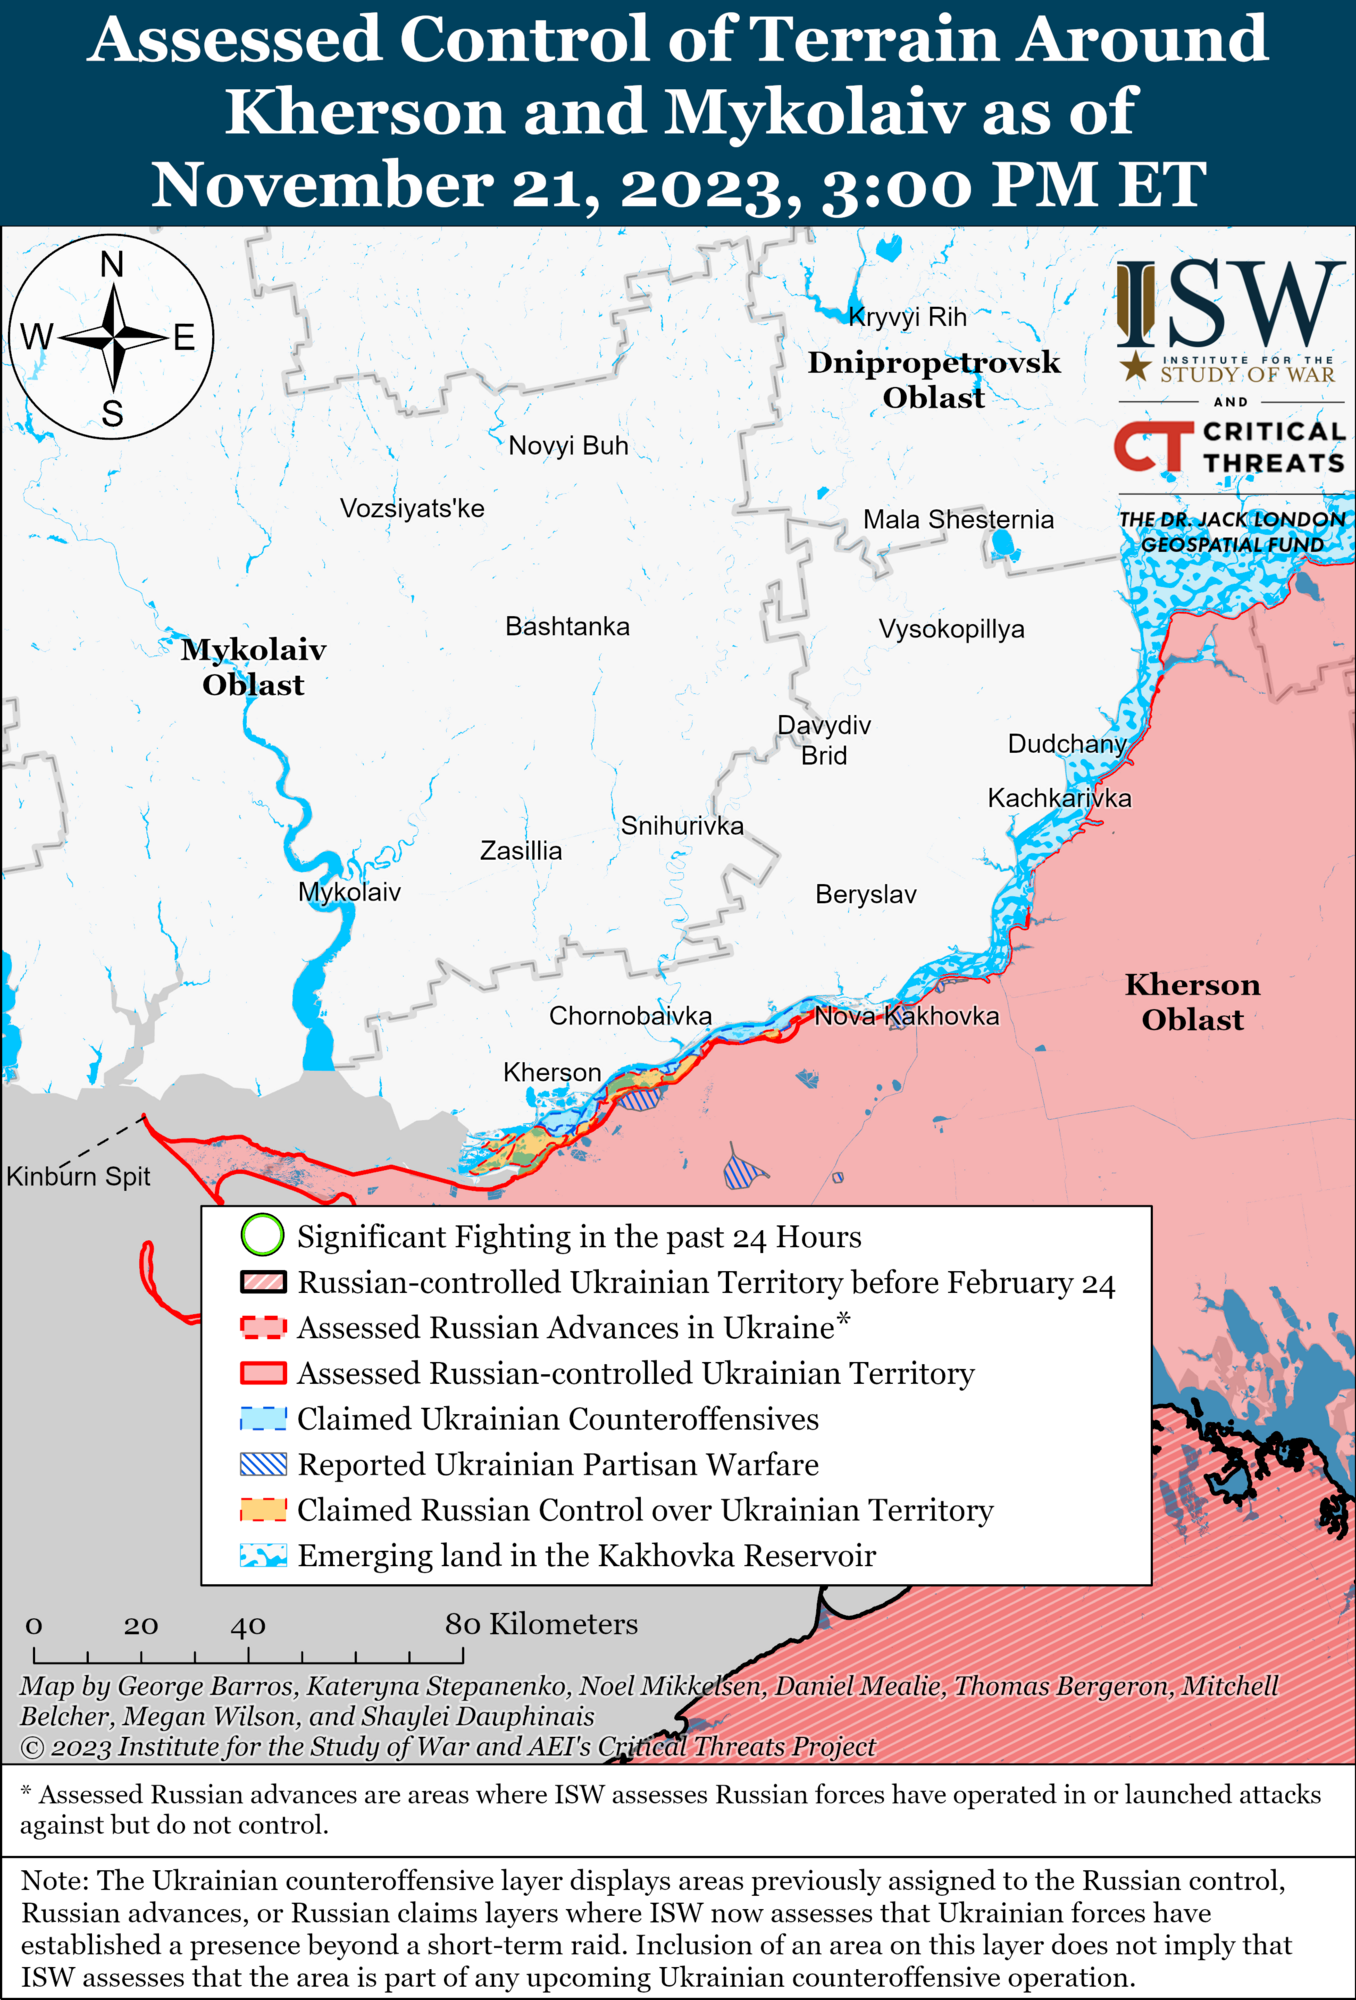 Both Ukraine and Russia perform operations despite worsening weather: ISW names key areas. Map